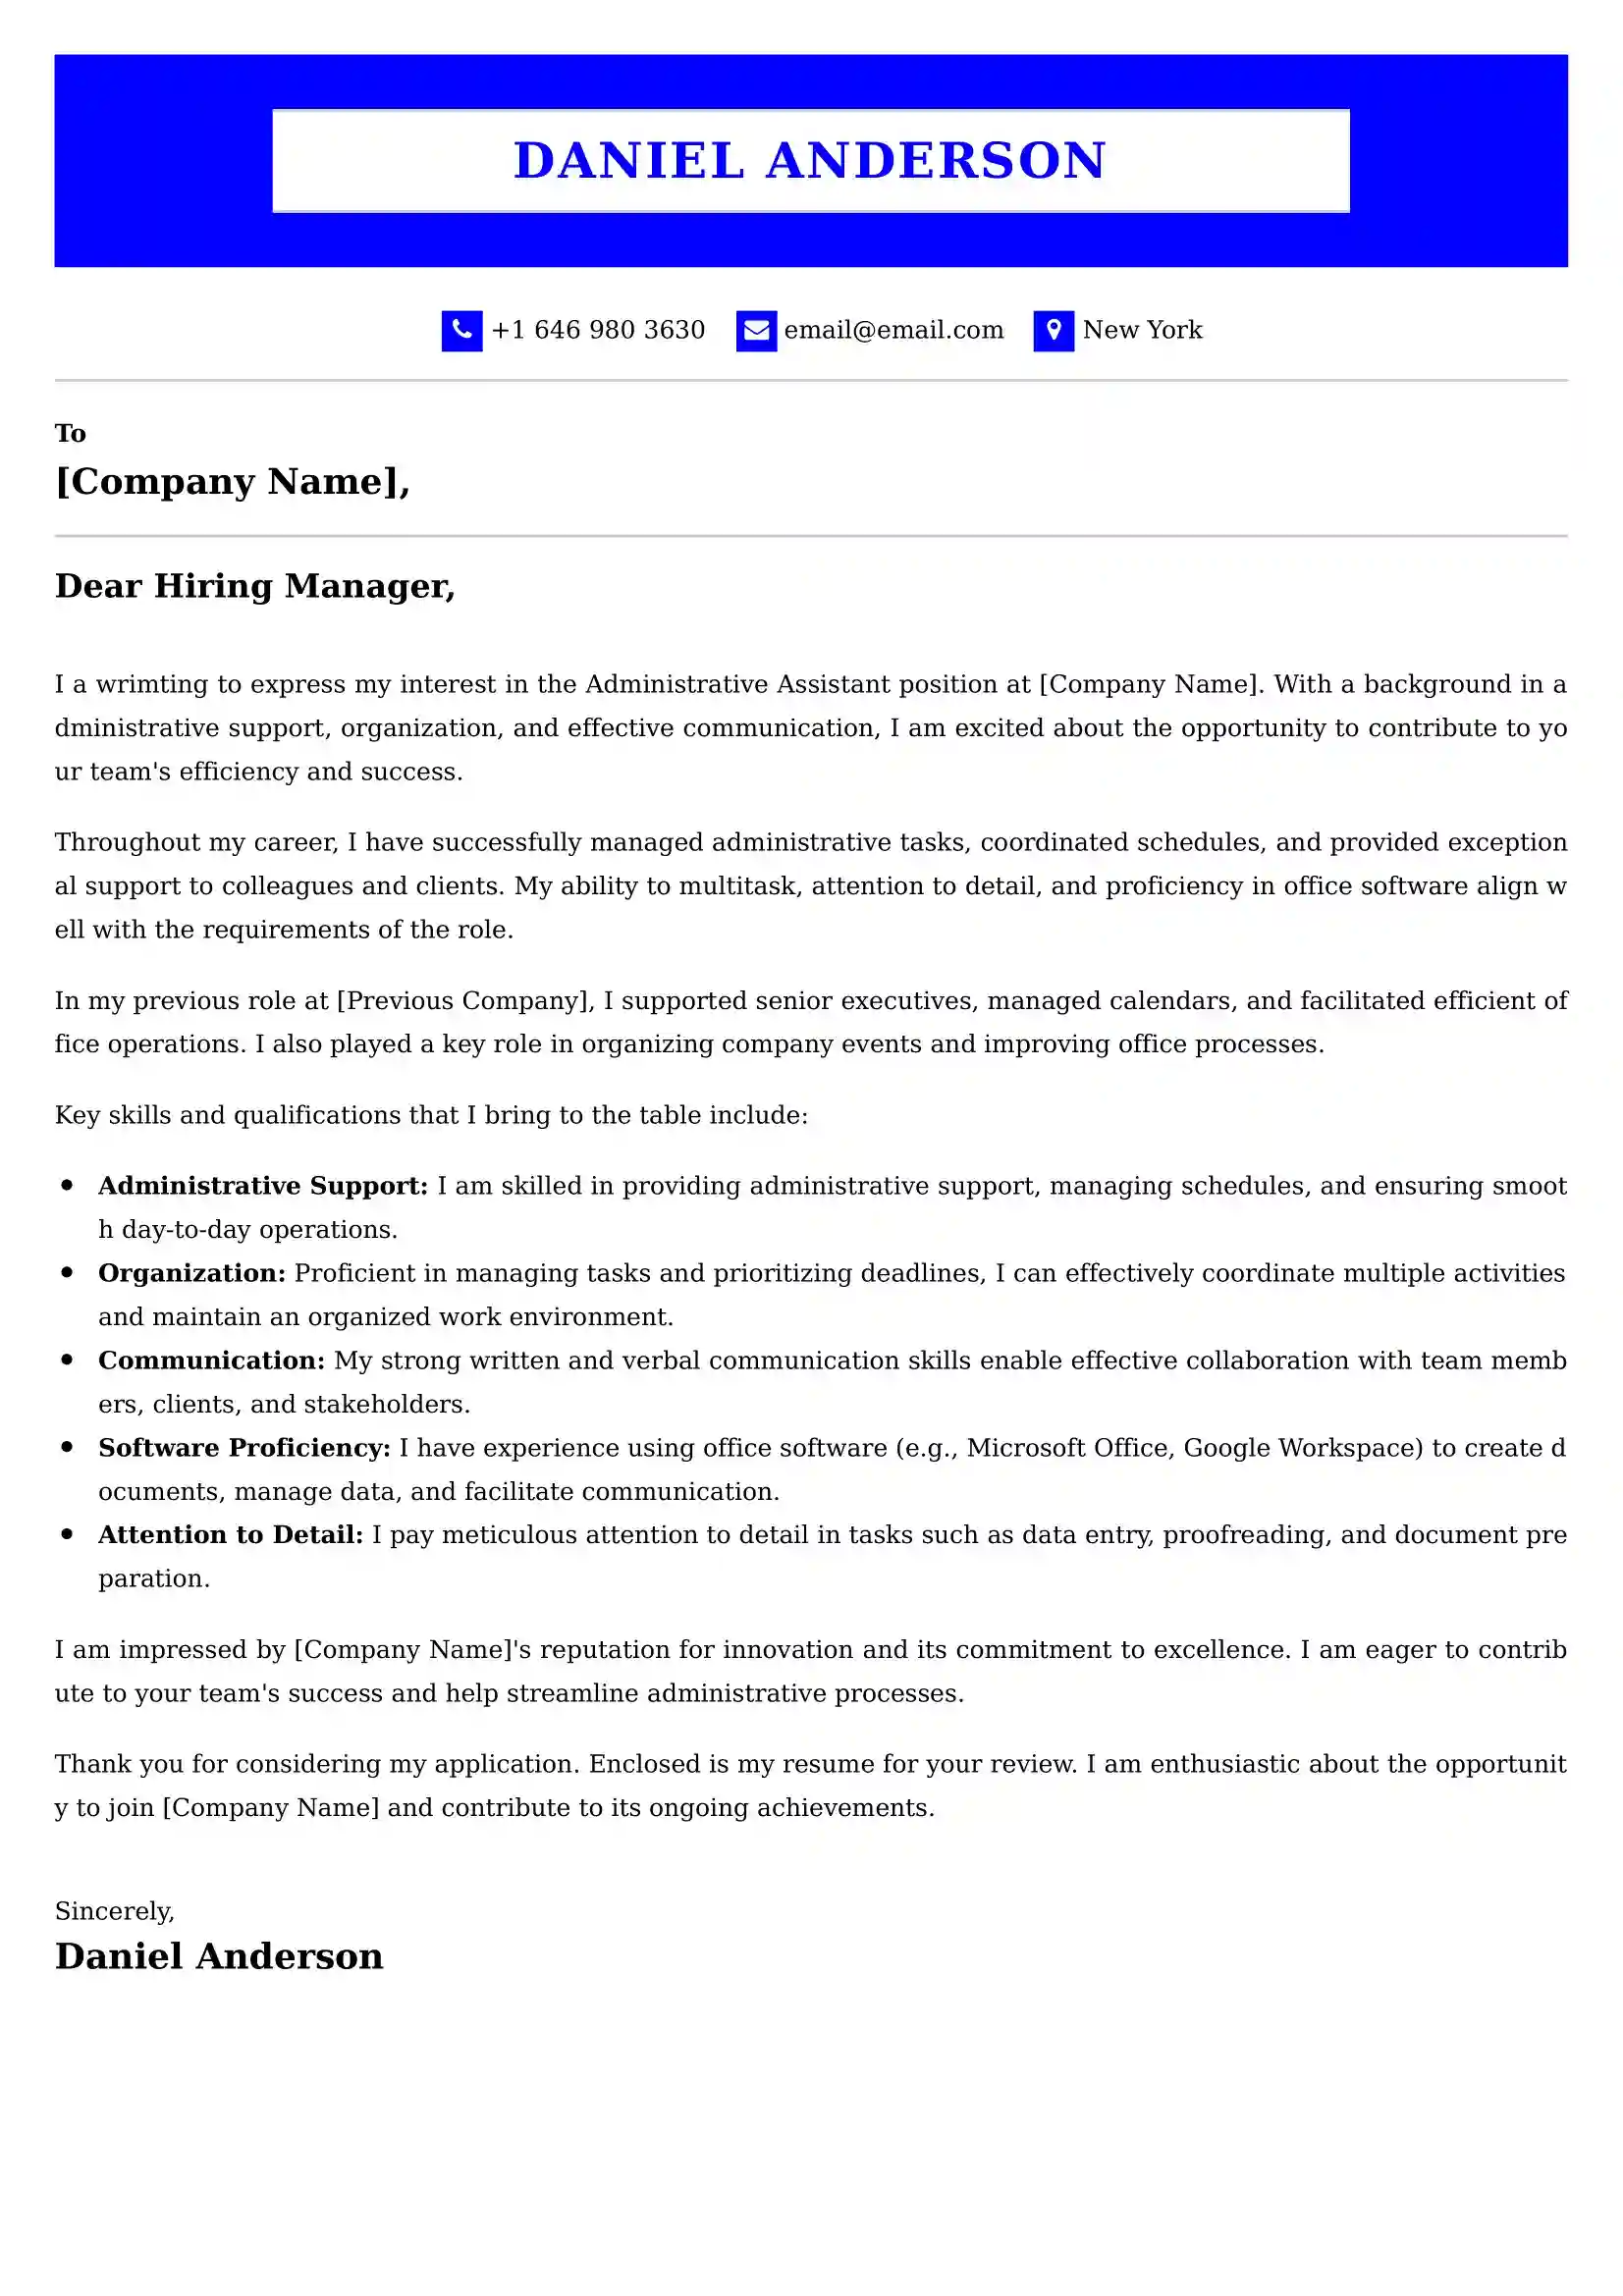 Administrative Assistant Cover Letter Examples Australia